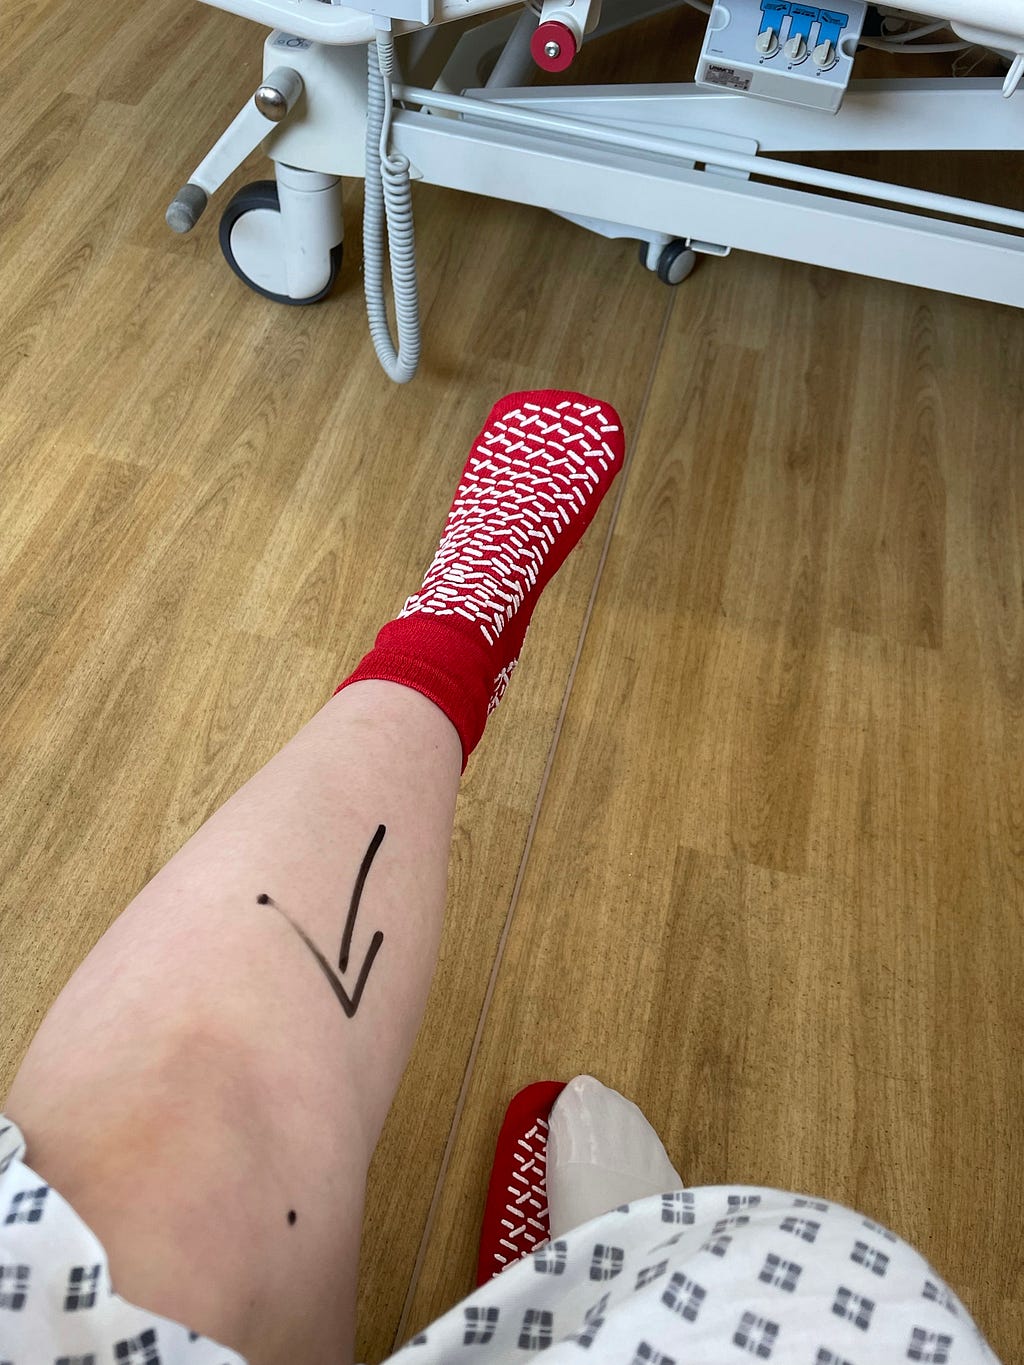 An image of the author’s left leg with an arrow drawn in marker pointing to the left knee. The author is white and wearing a red hospital non-slip sock.